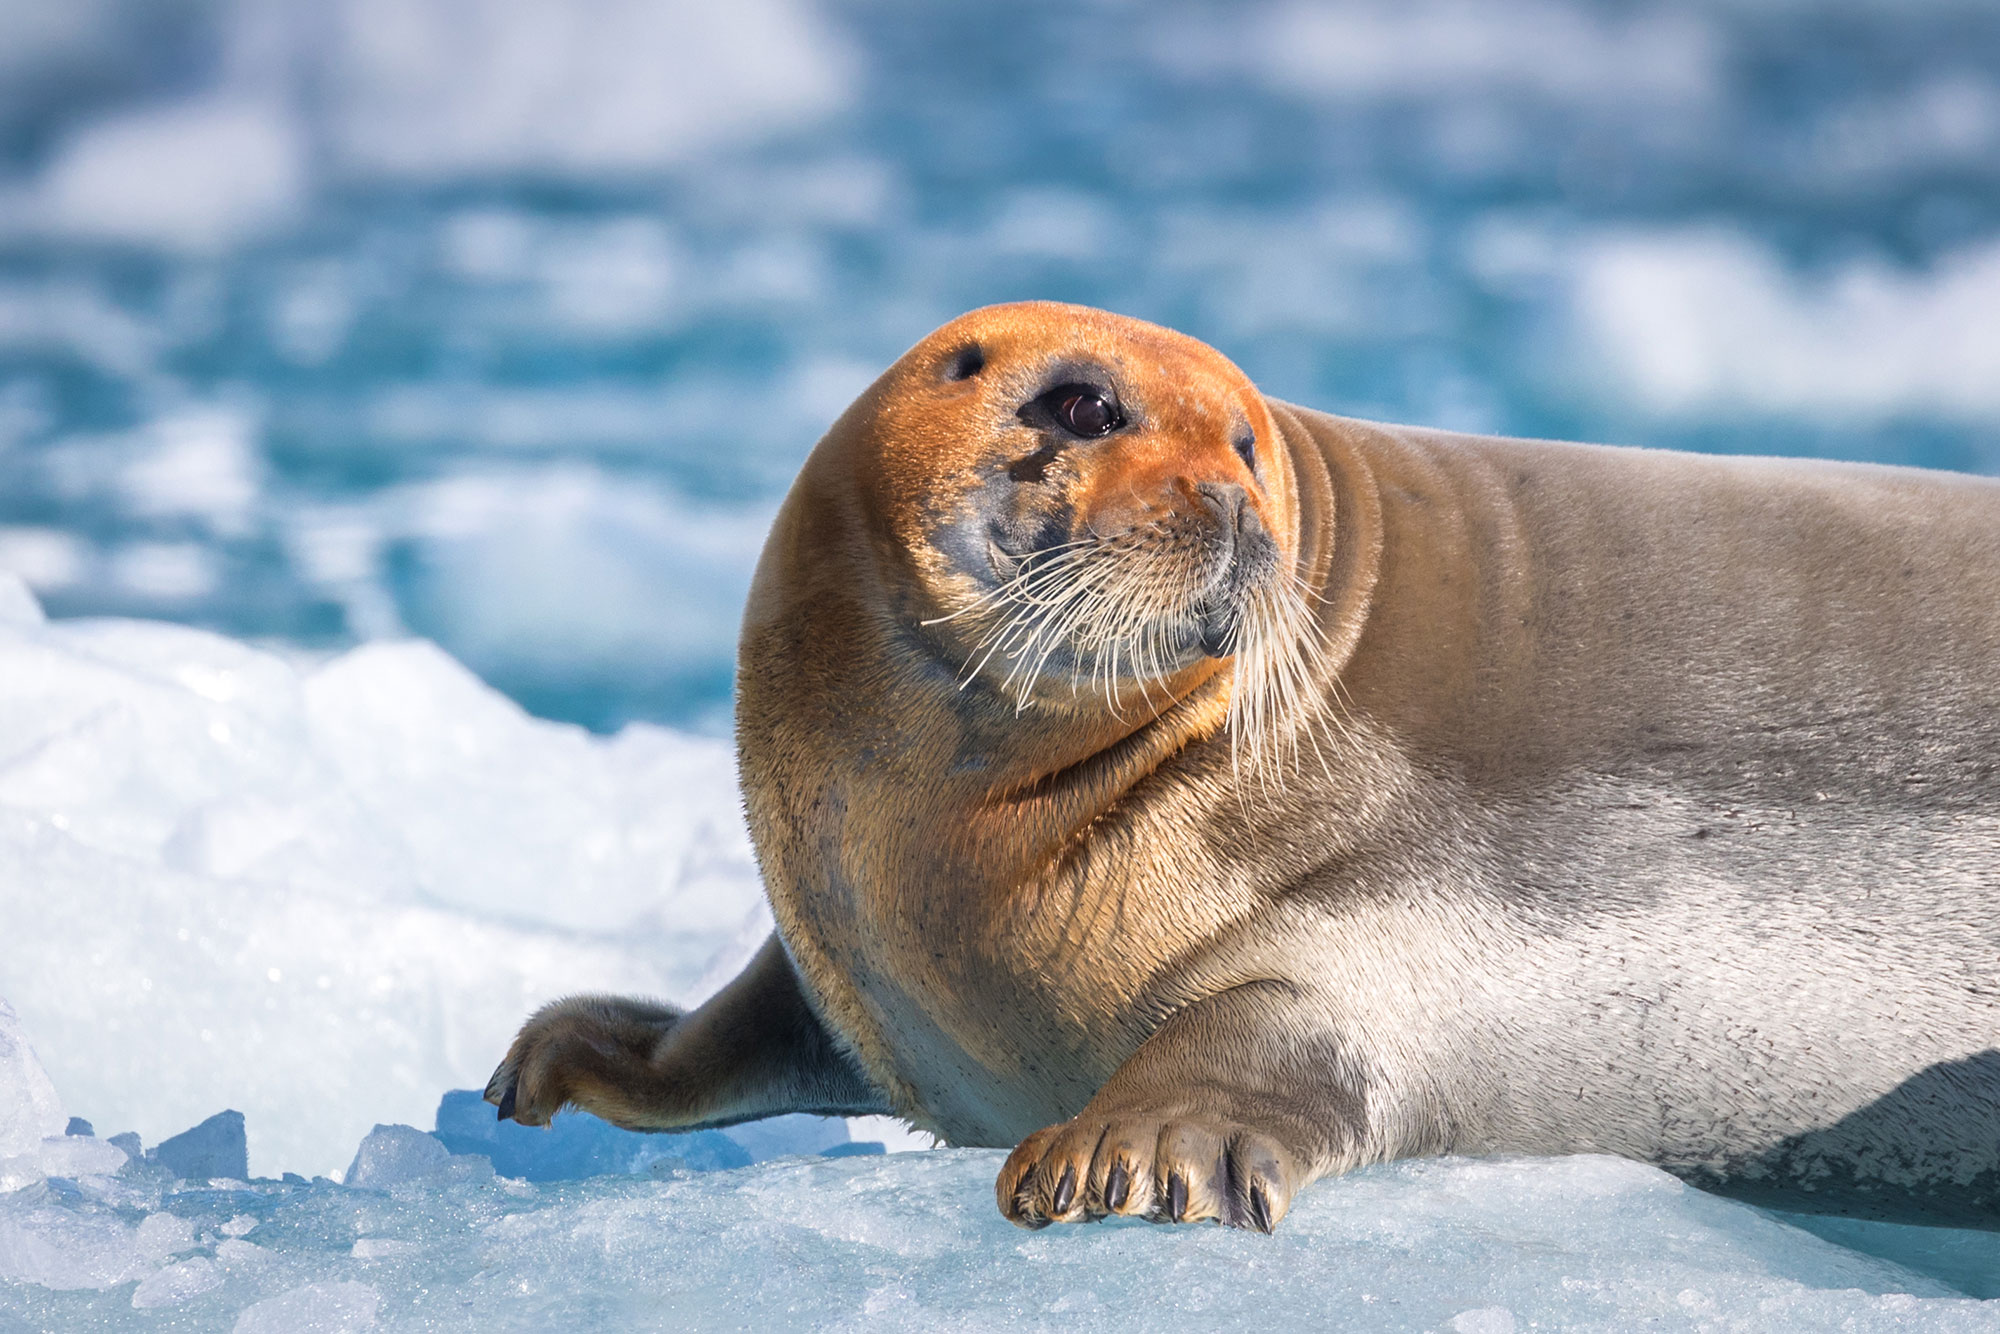 A uniquely colored bearded seal surveys its surroundings  near Lilliehook Glacier, Svalbard, in Arctic Norway.